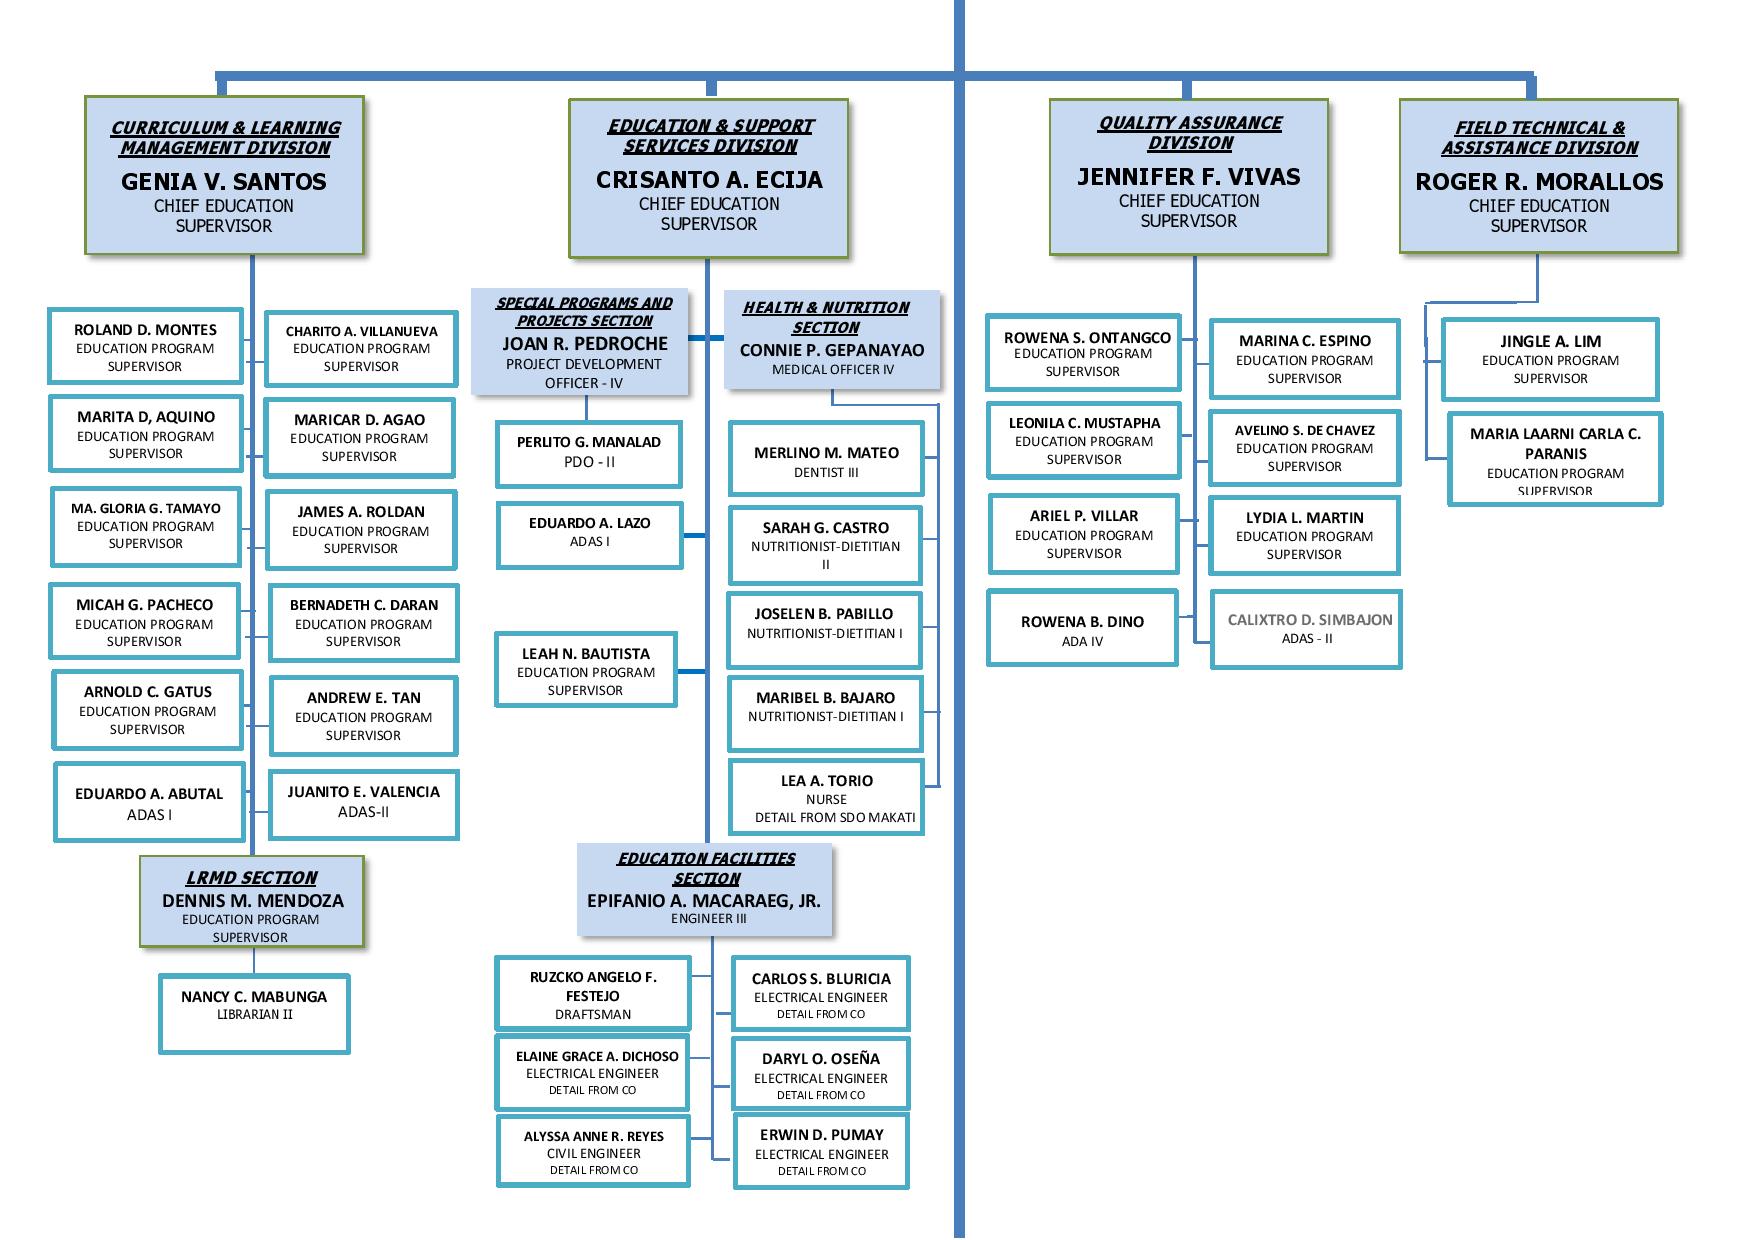 Organizational Chart – Department of Education – NCR